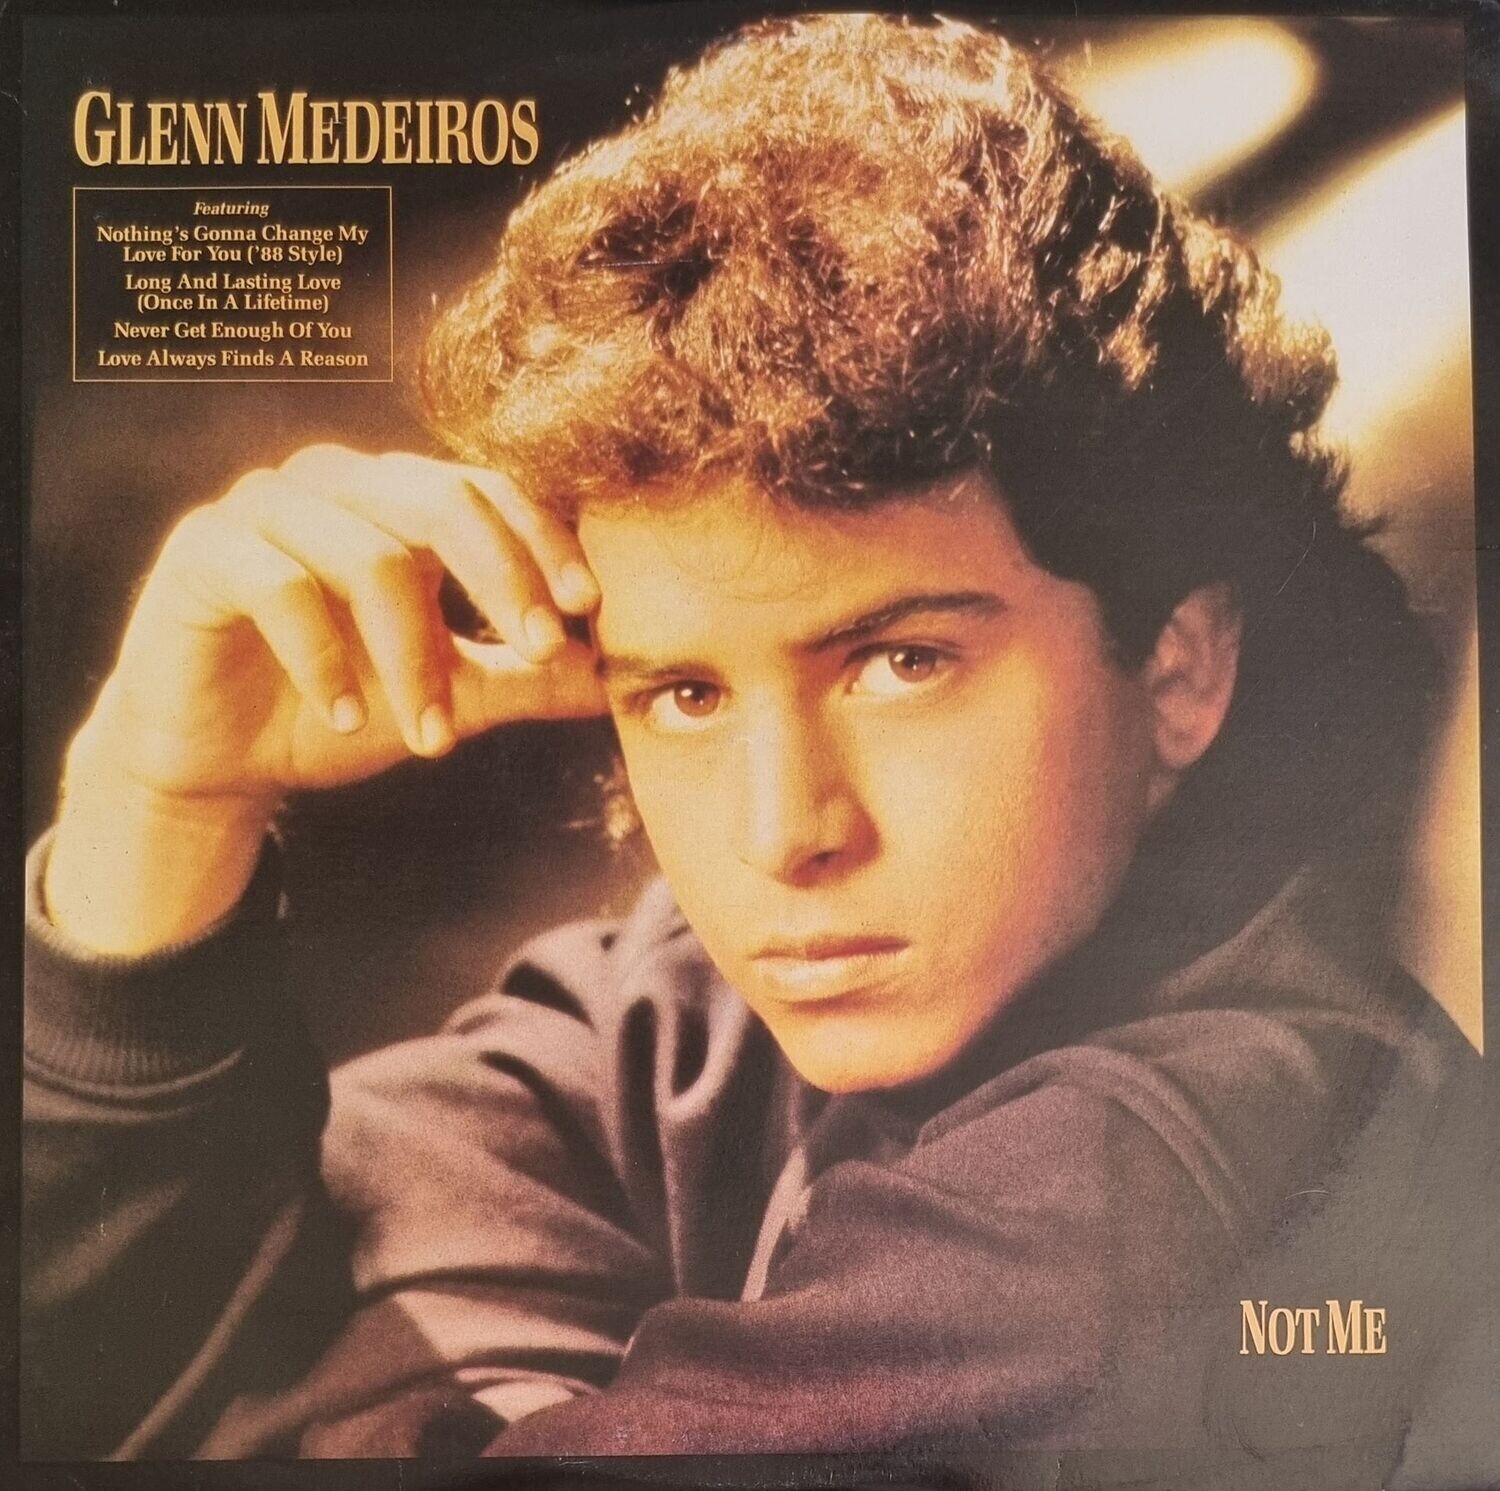 Glenn Medeiros – Not Me (Featuring Nothings gonna change my love for you) [1988]